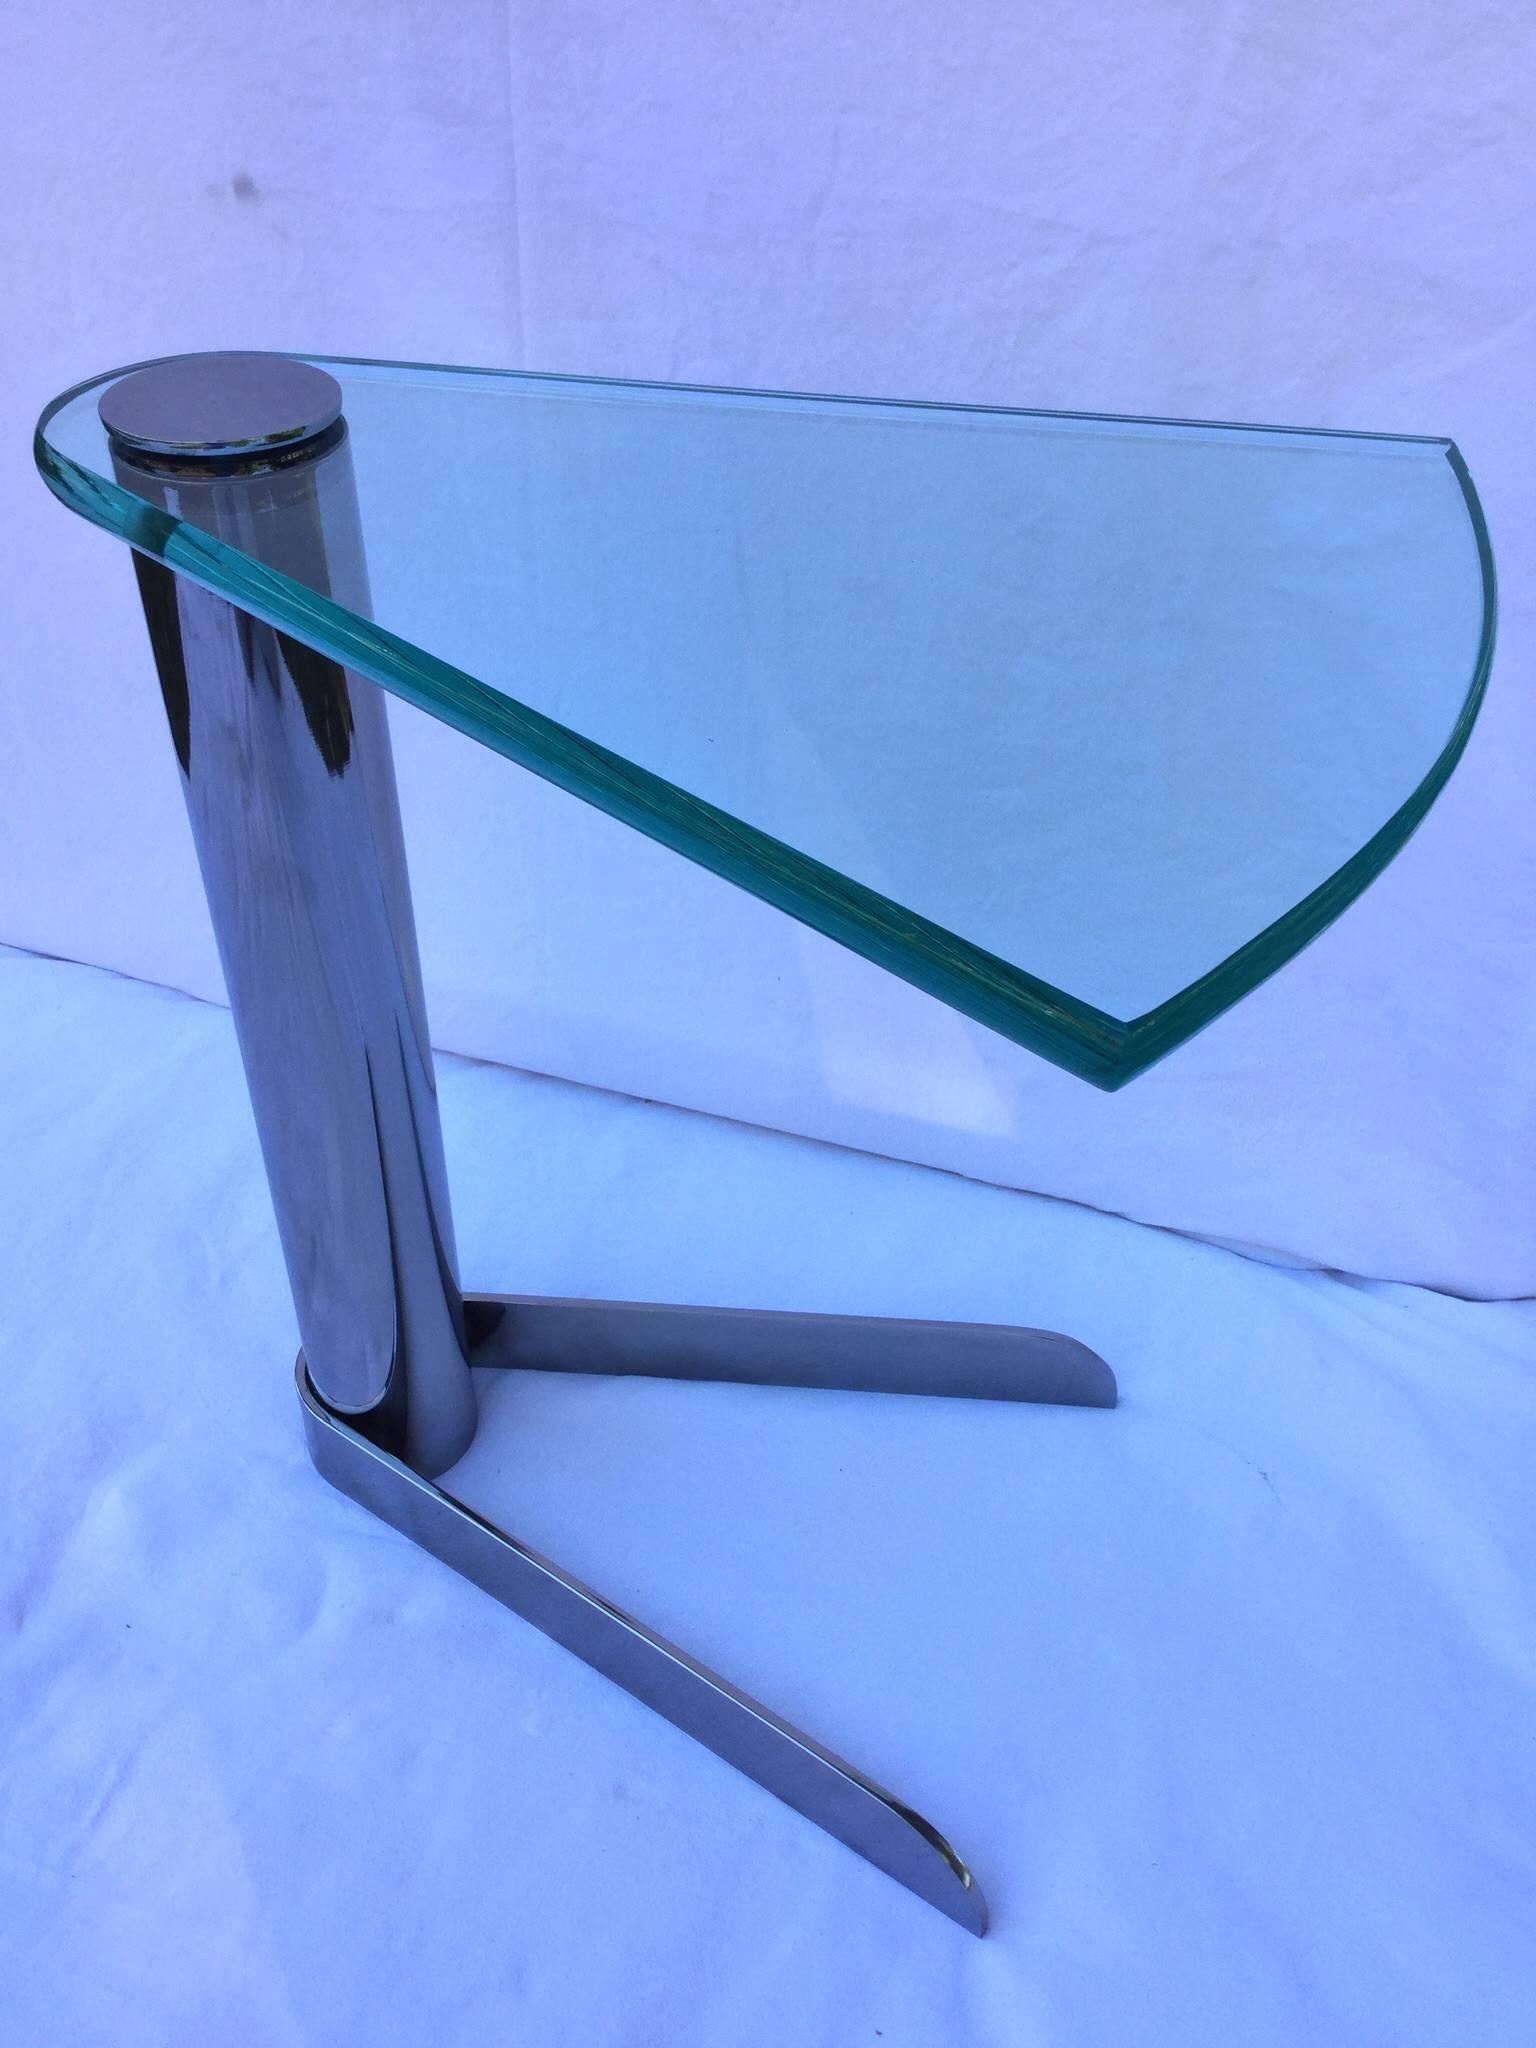 In excellent condition, this unique occasional table for use anywhere in your home. Manufactured by Design Institute of America.
Slip it next to your chair or bed.
With just a few hairline scratches to glass, it's looks like new.